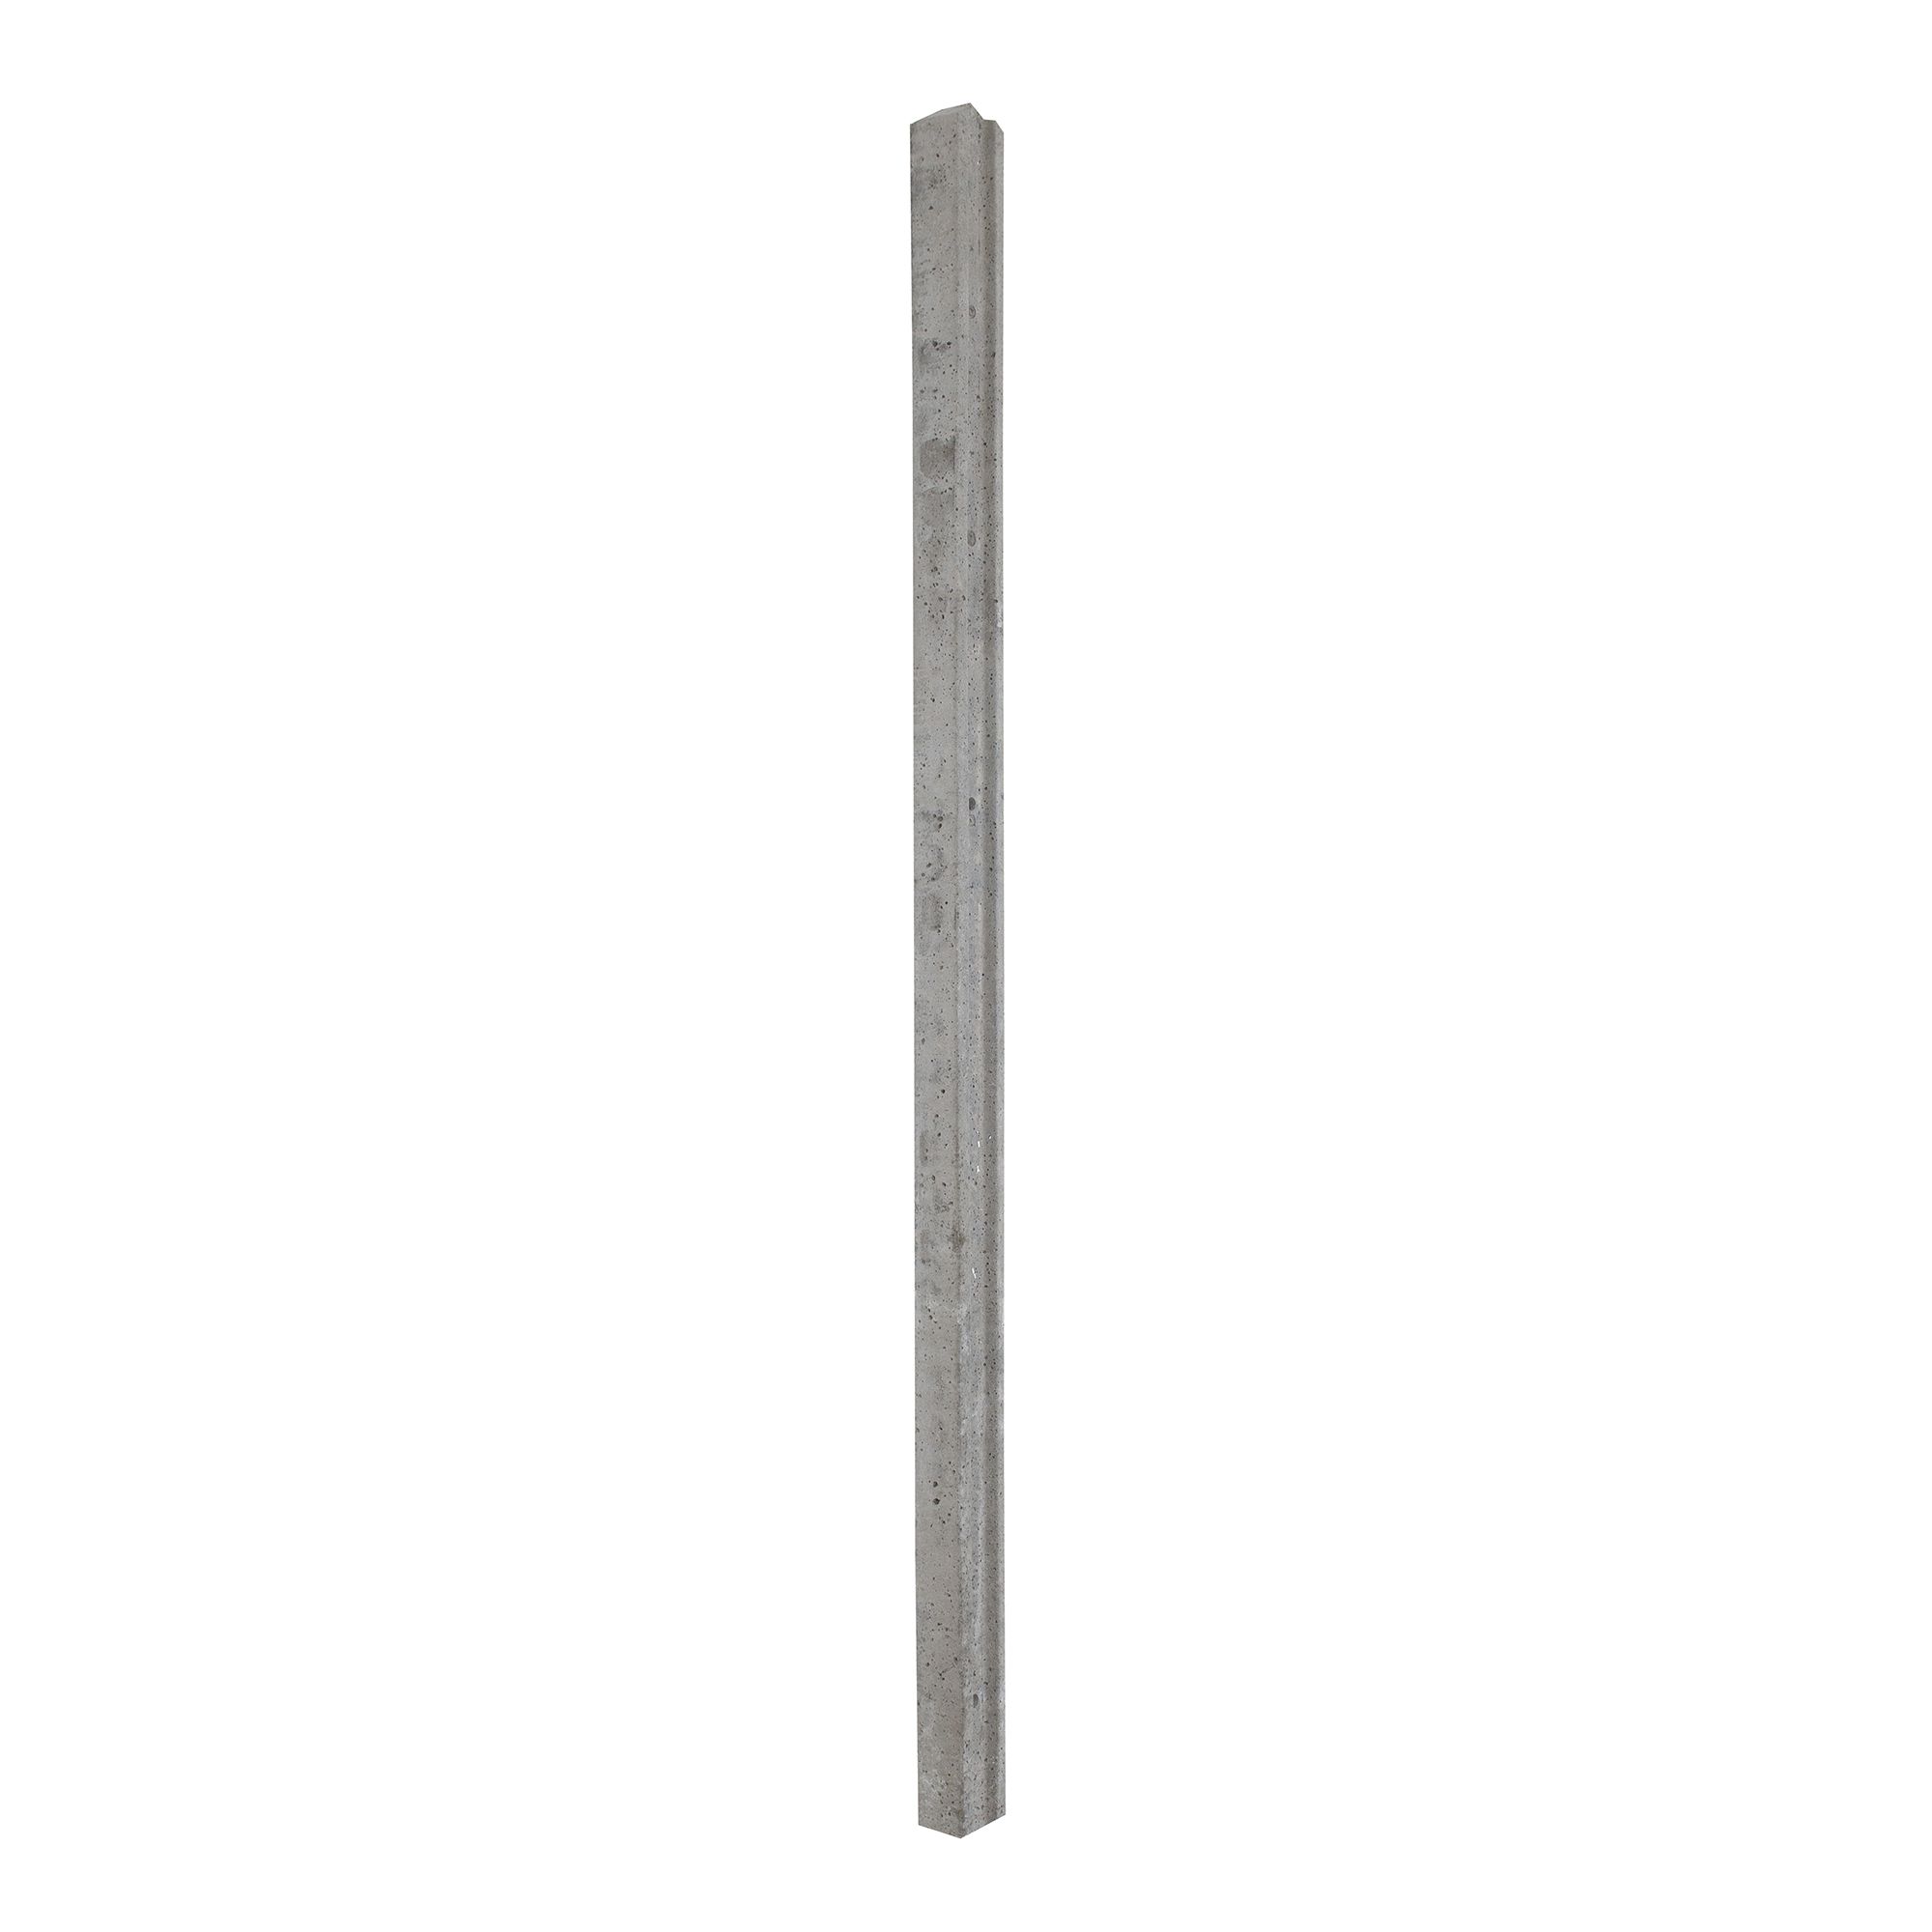 Forest Garden Grey Slotted Square Concrete Fence post (H)2.36m (W)84mm, Pack of 10